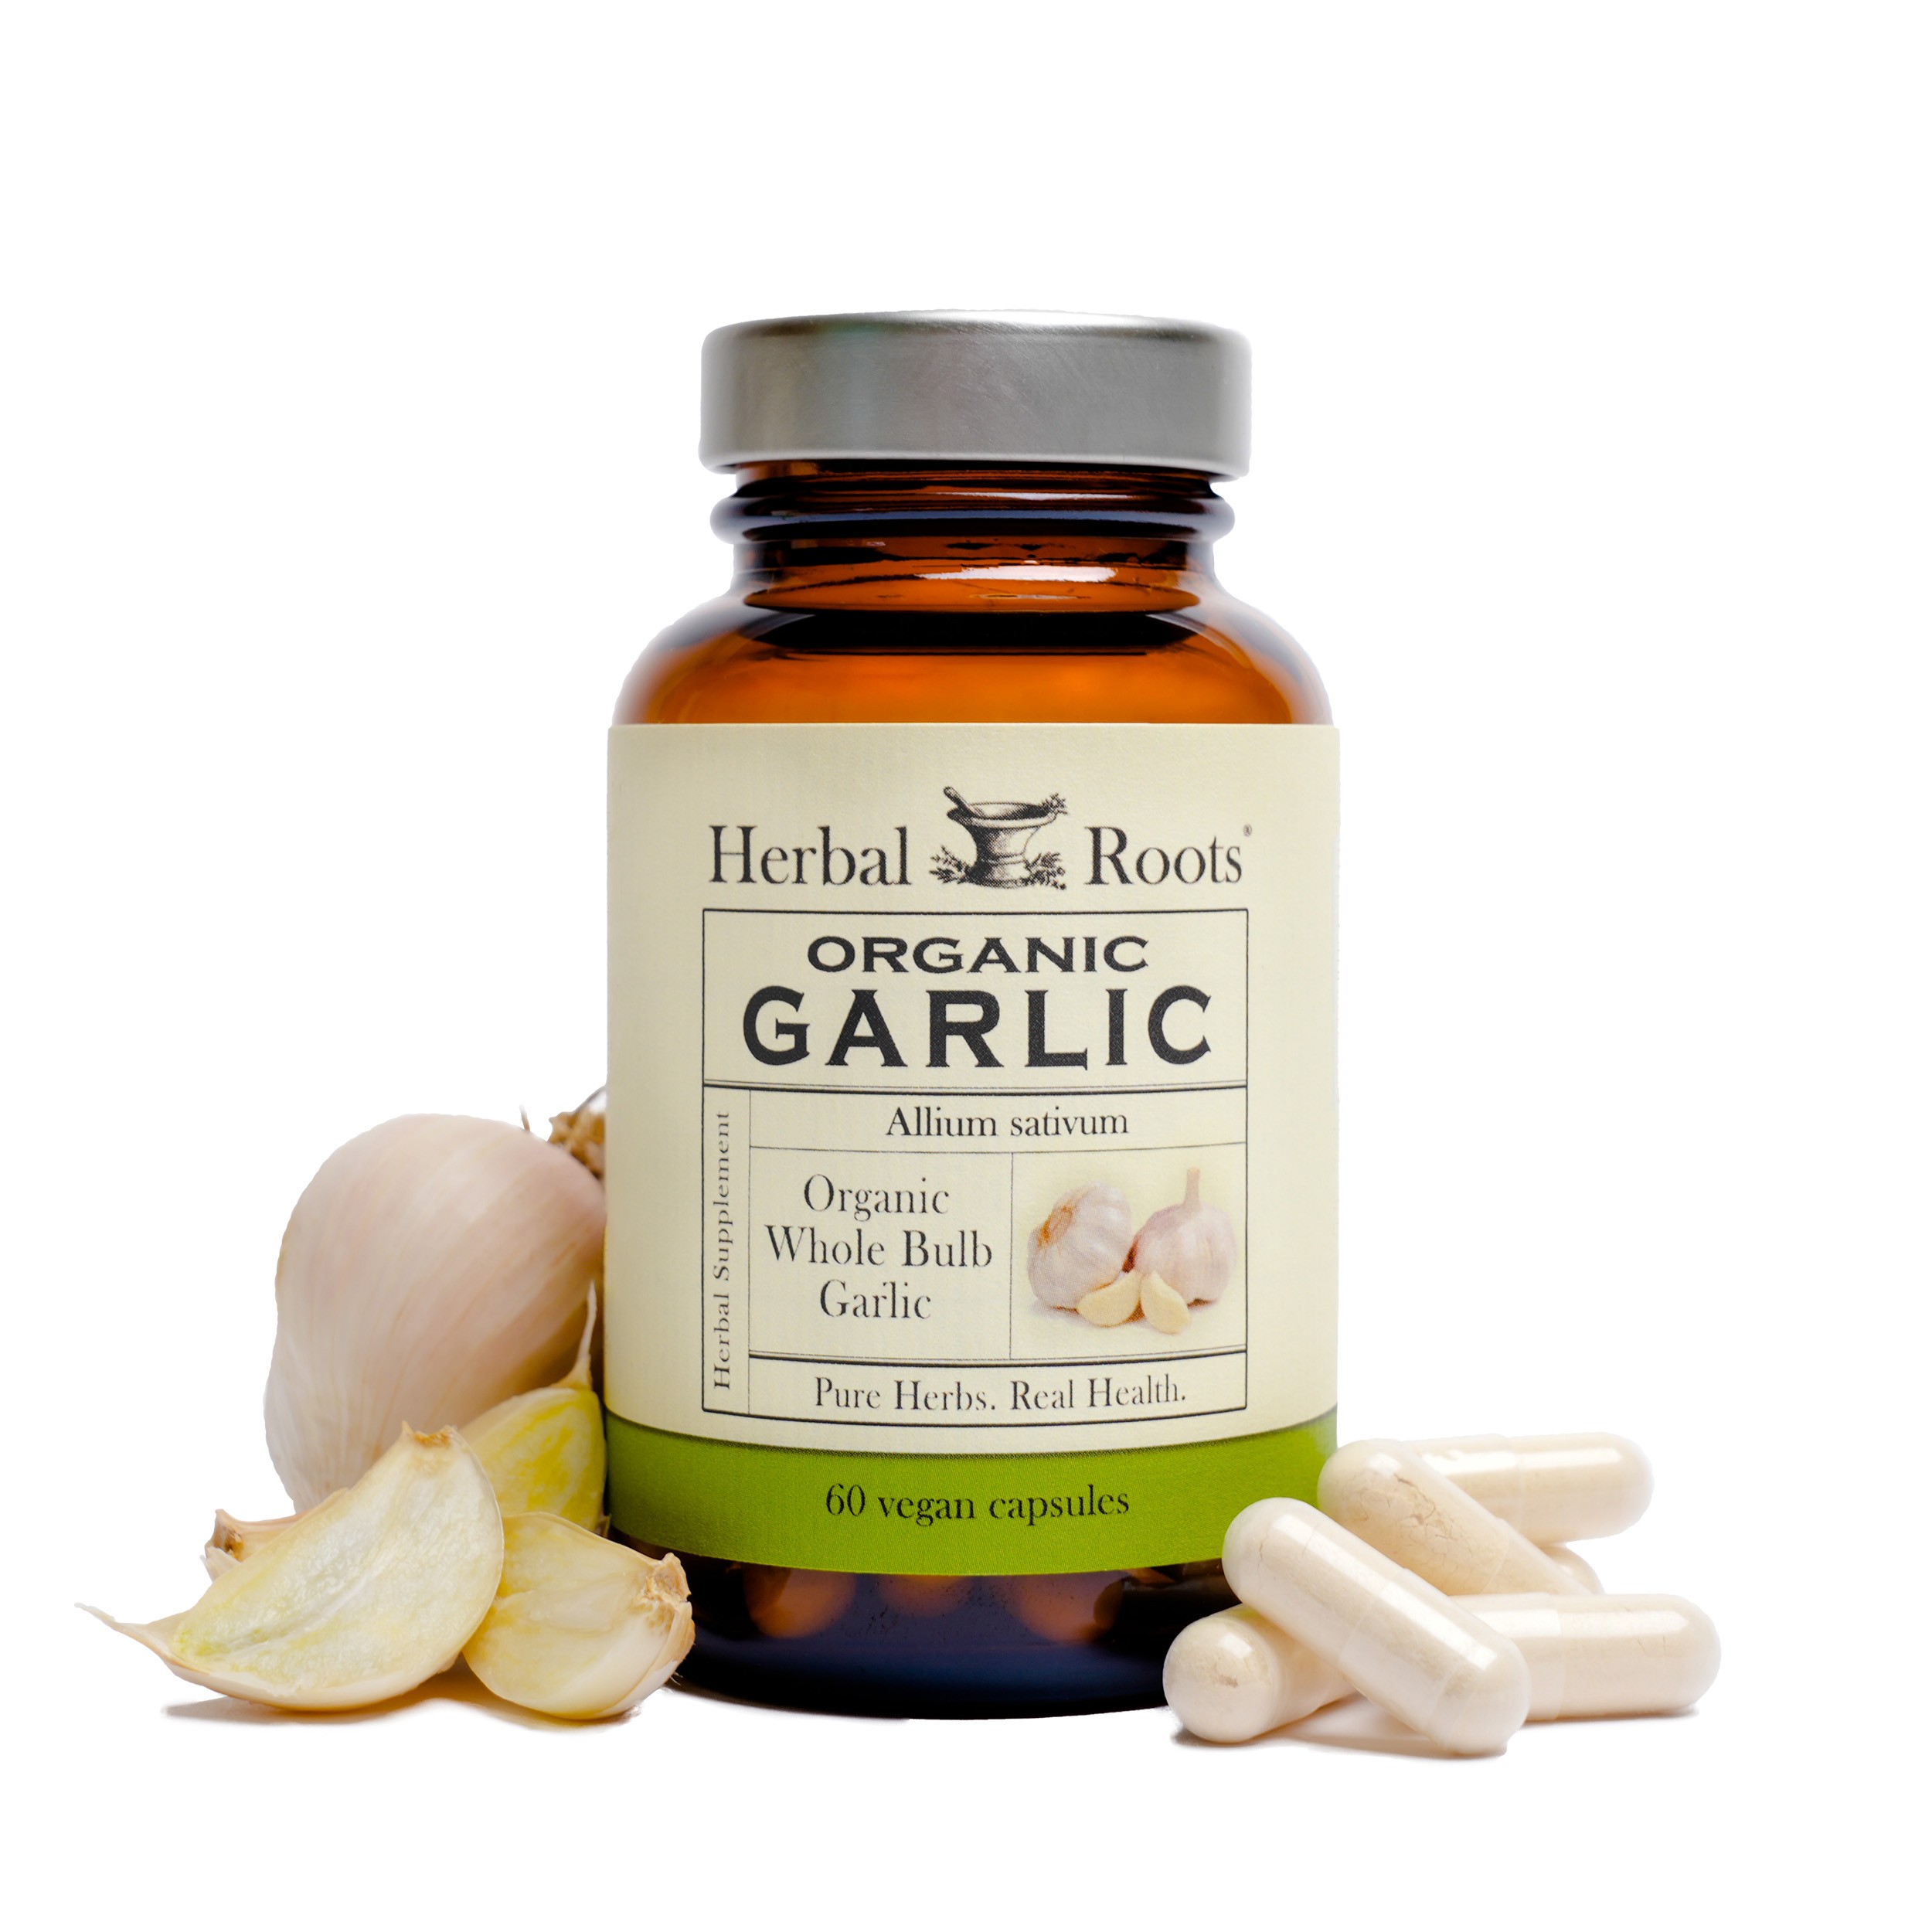 Herbal Roots Garlic bottle with pills and garlic cloves